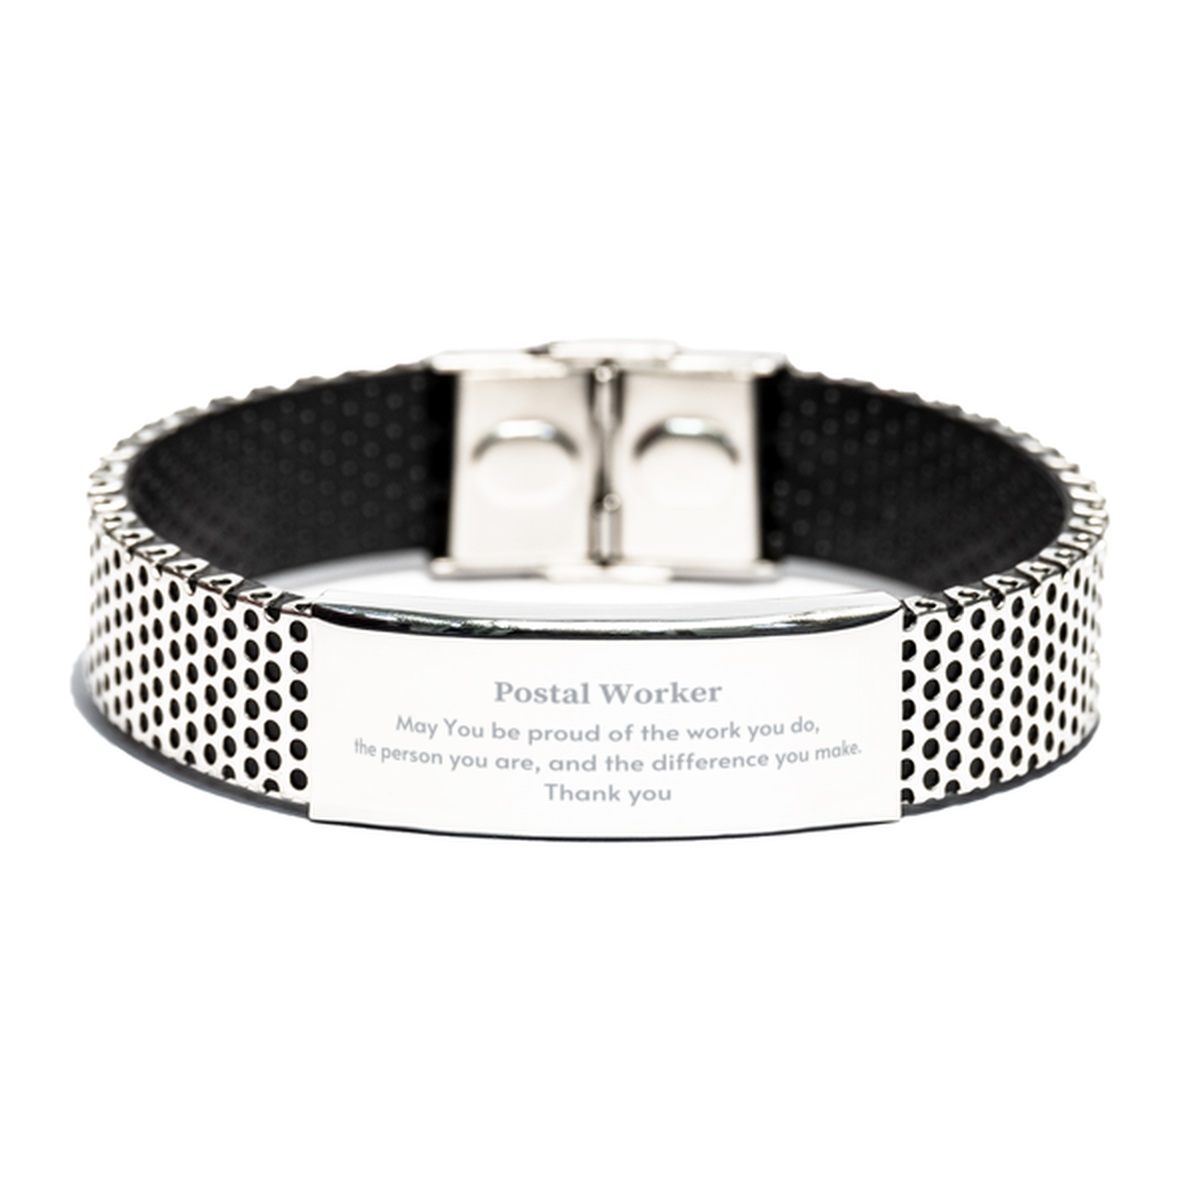 Heartwarming Stainless Steel Bracelet Retirement Coworkers Gifts for Postal Worker, Postal Worker May You be proud of the work you do, the person you are Gifts for Boss Men Women Friends